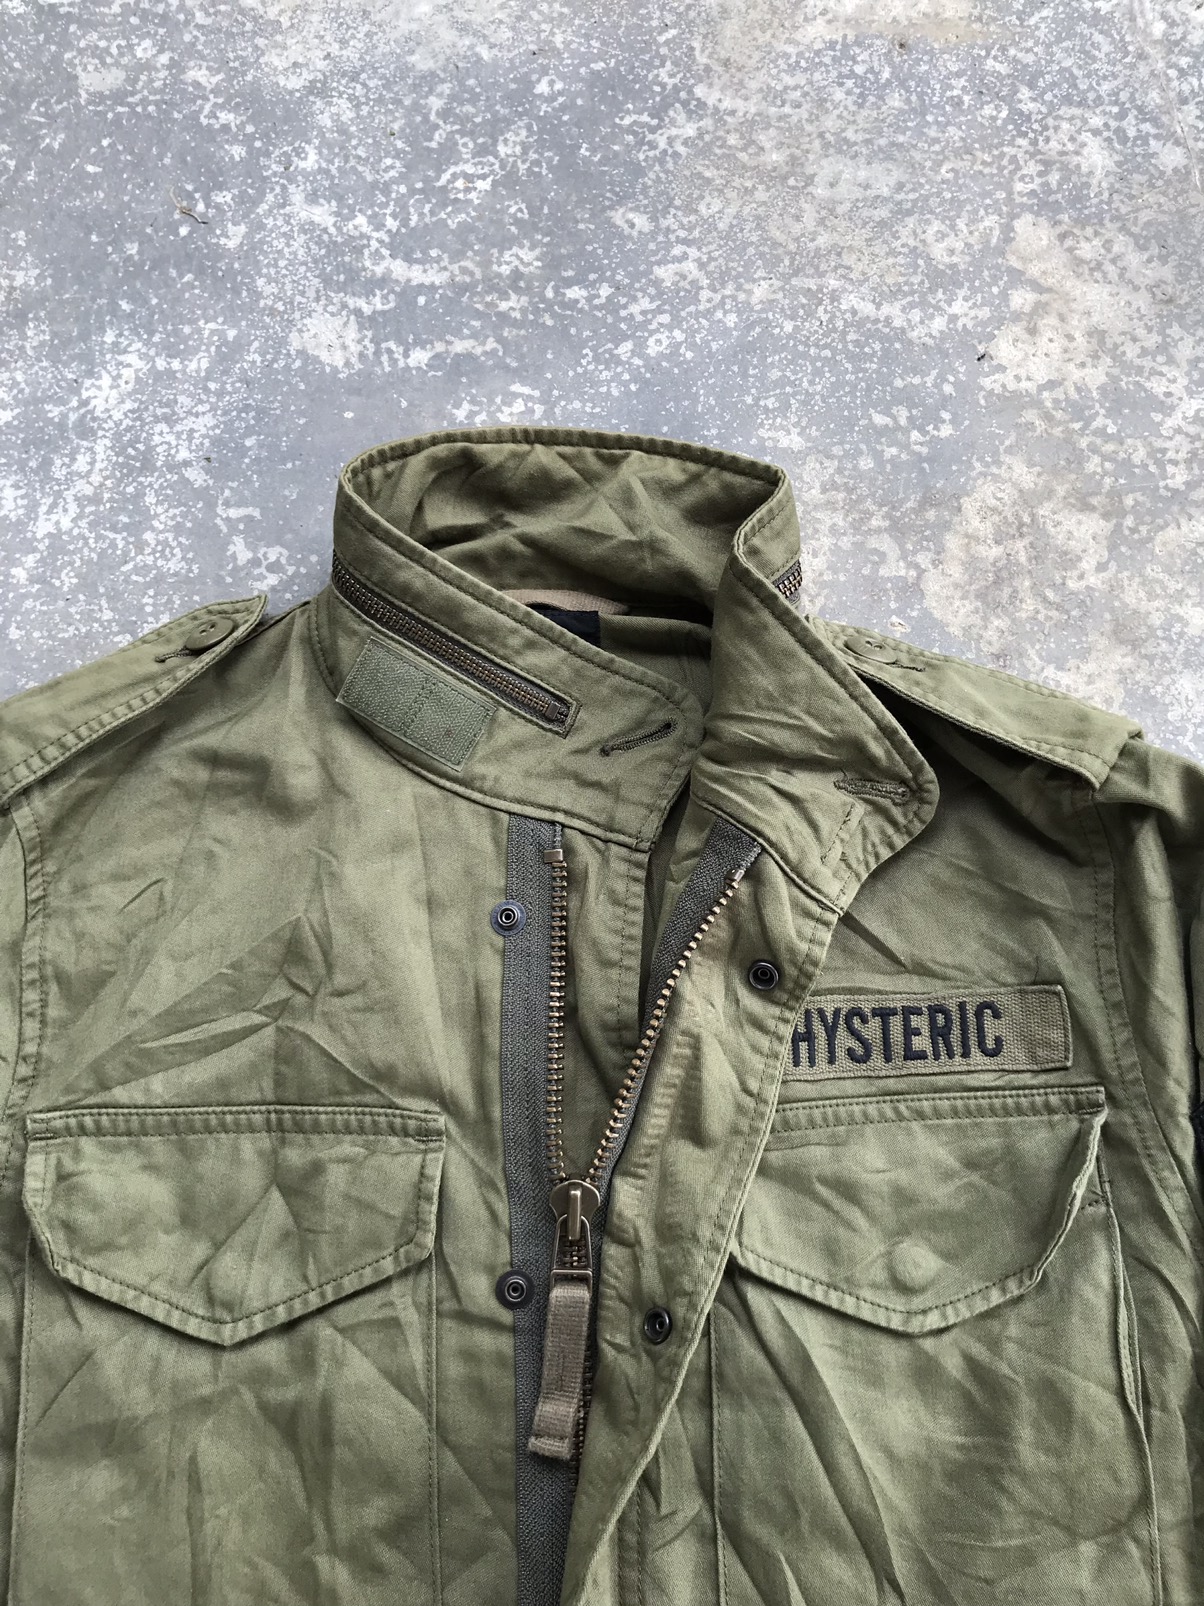 Hysteric glamour Parka Army Jacket - 5